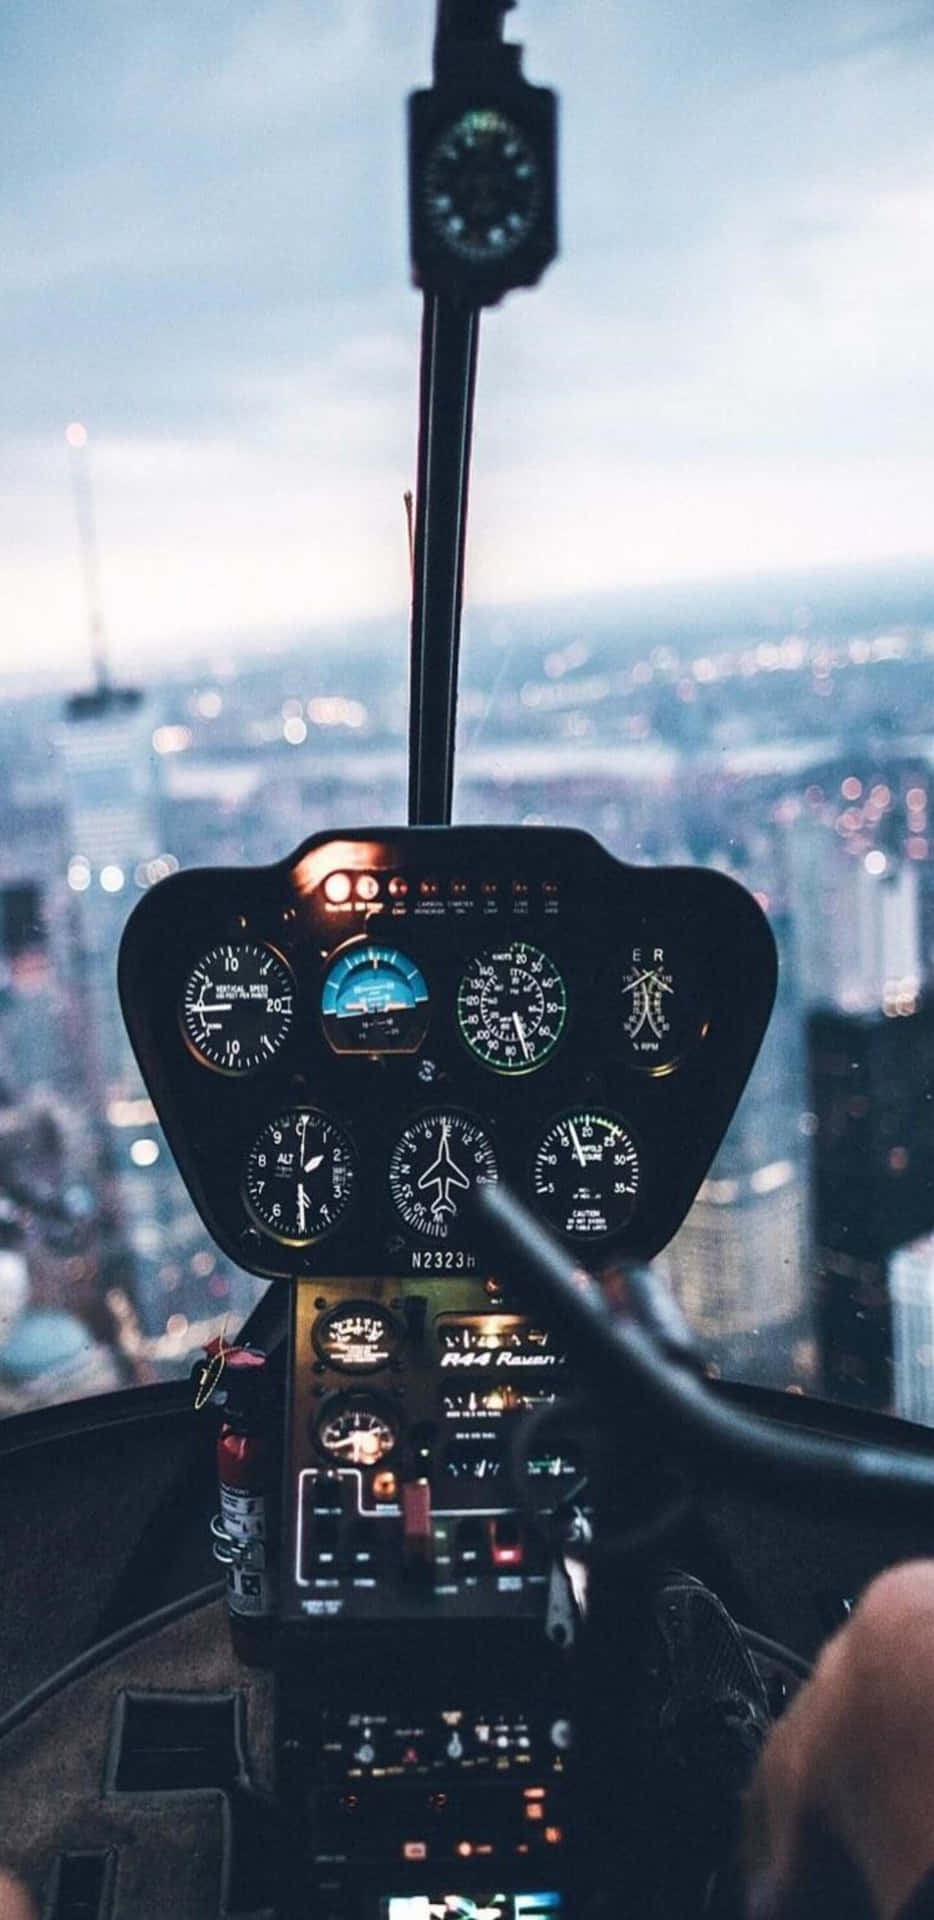 Pixel 3xl Helicopters Background Robinson R44 Cockpit View